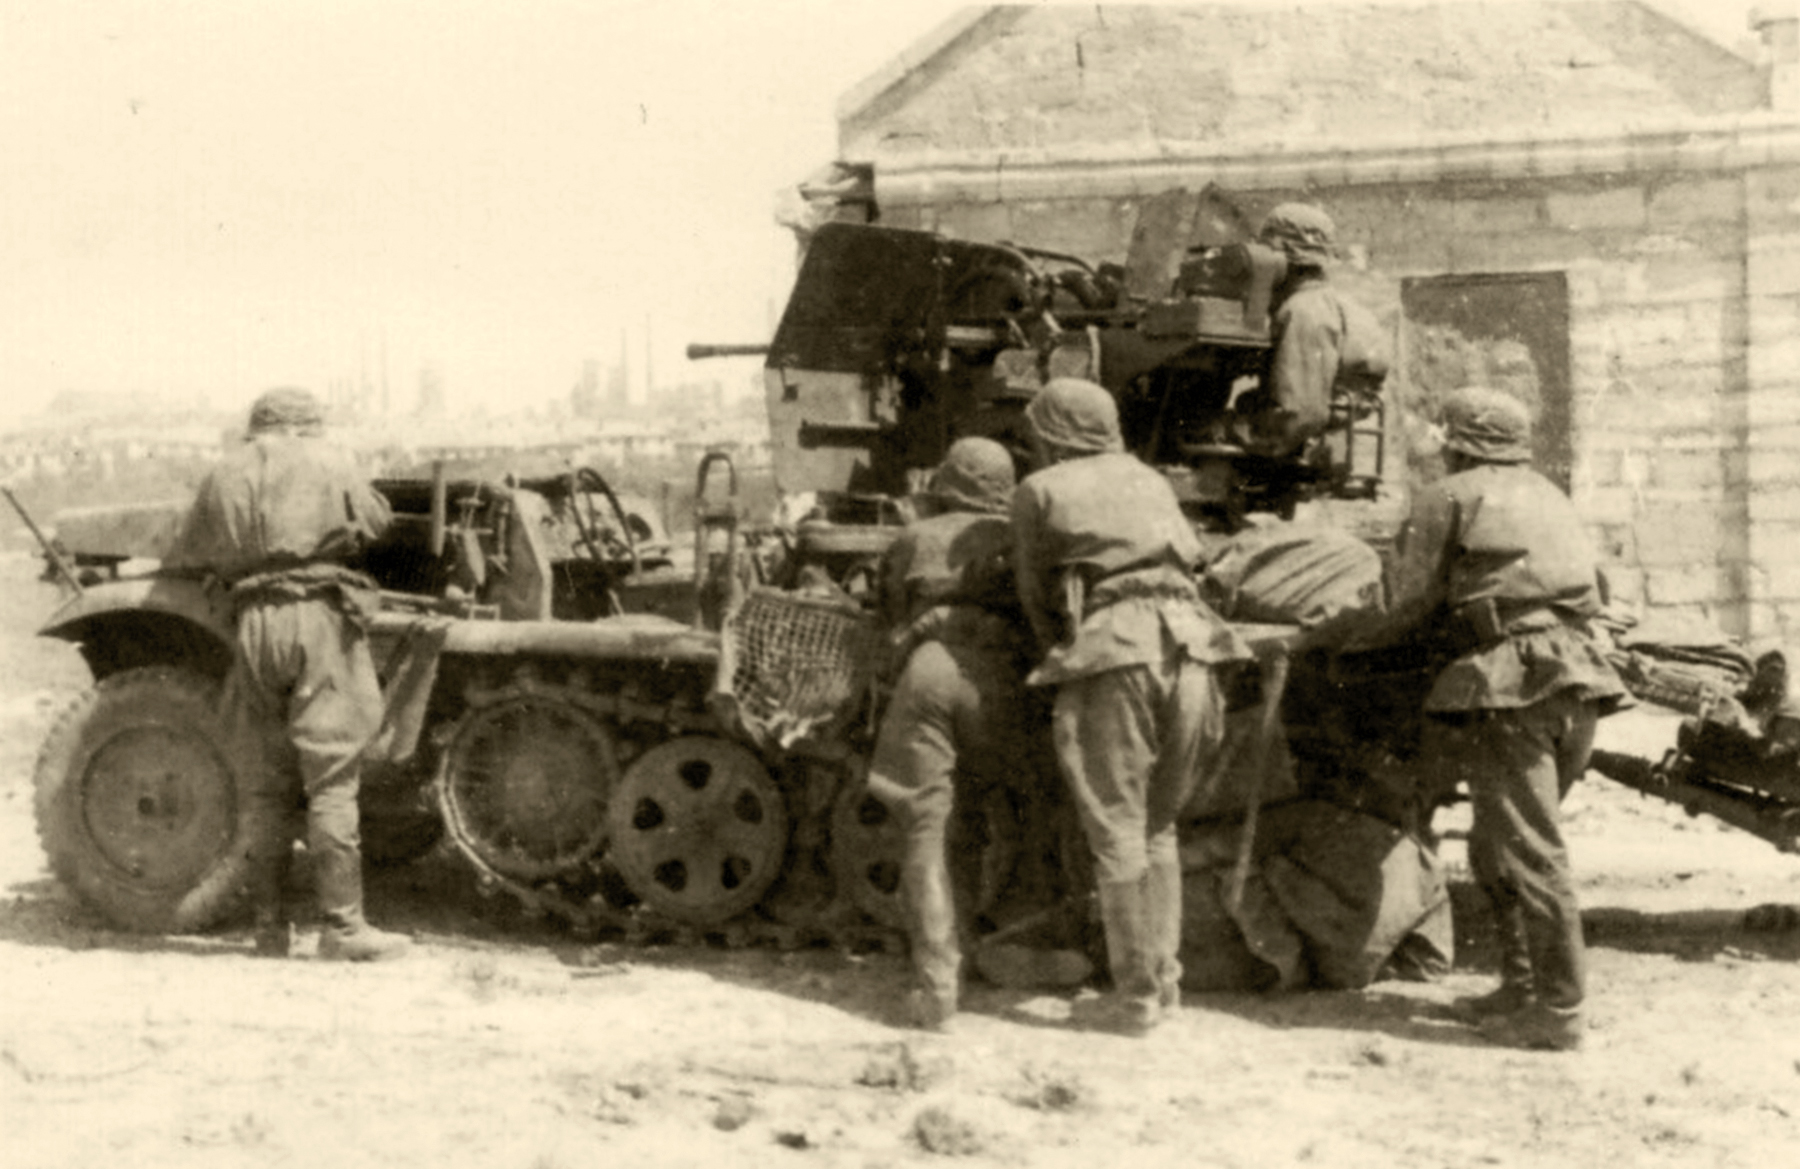 11th Army 22 Infanterie Division Fla Bataillon 22 (mot) during the attack on Sevastopol 1942 02